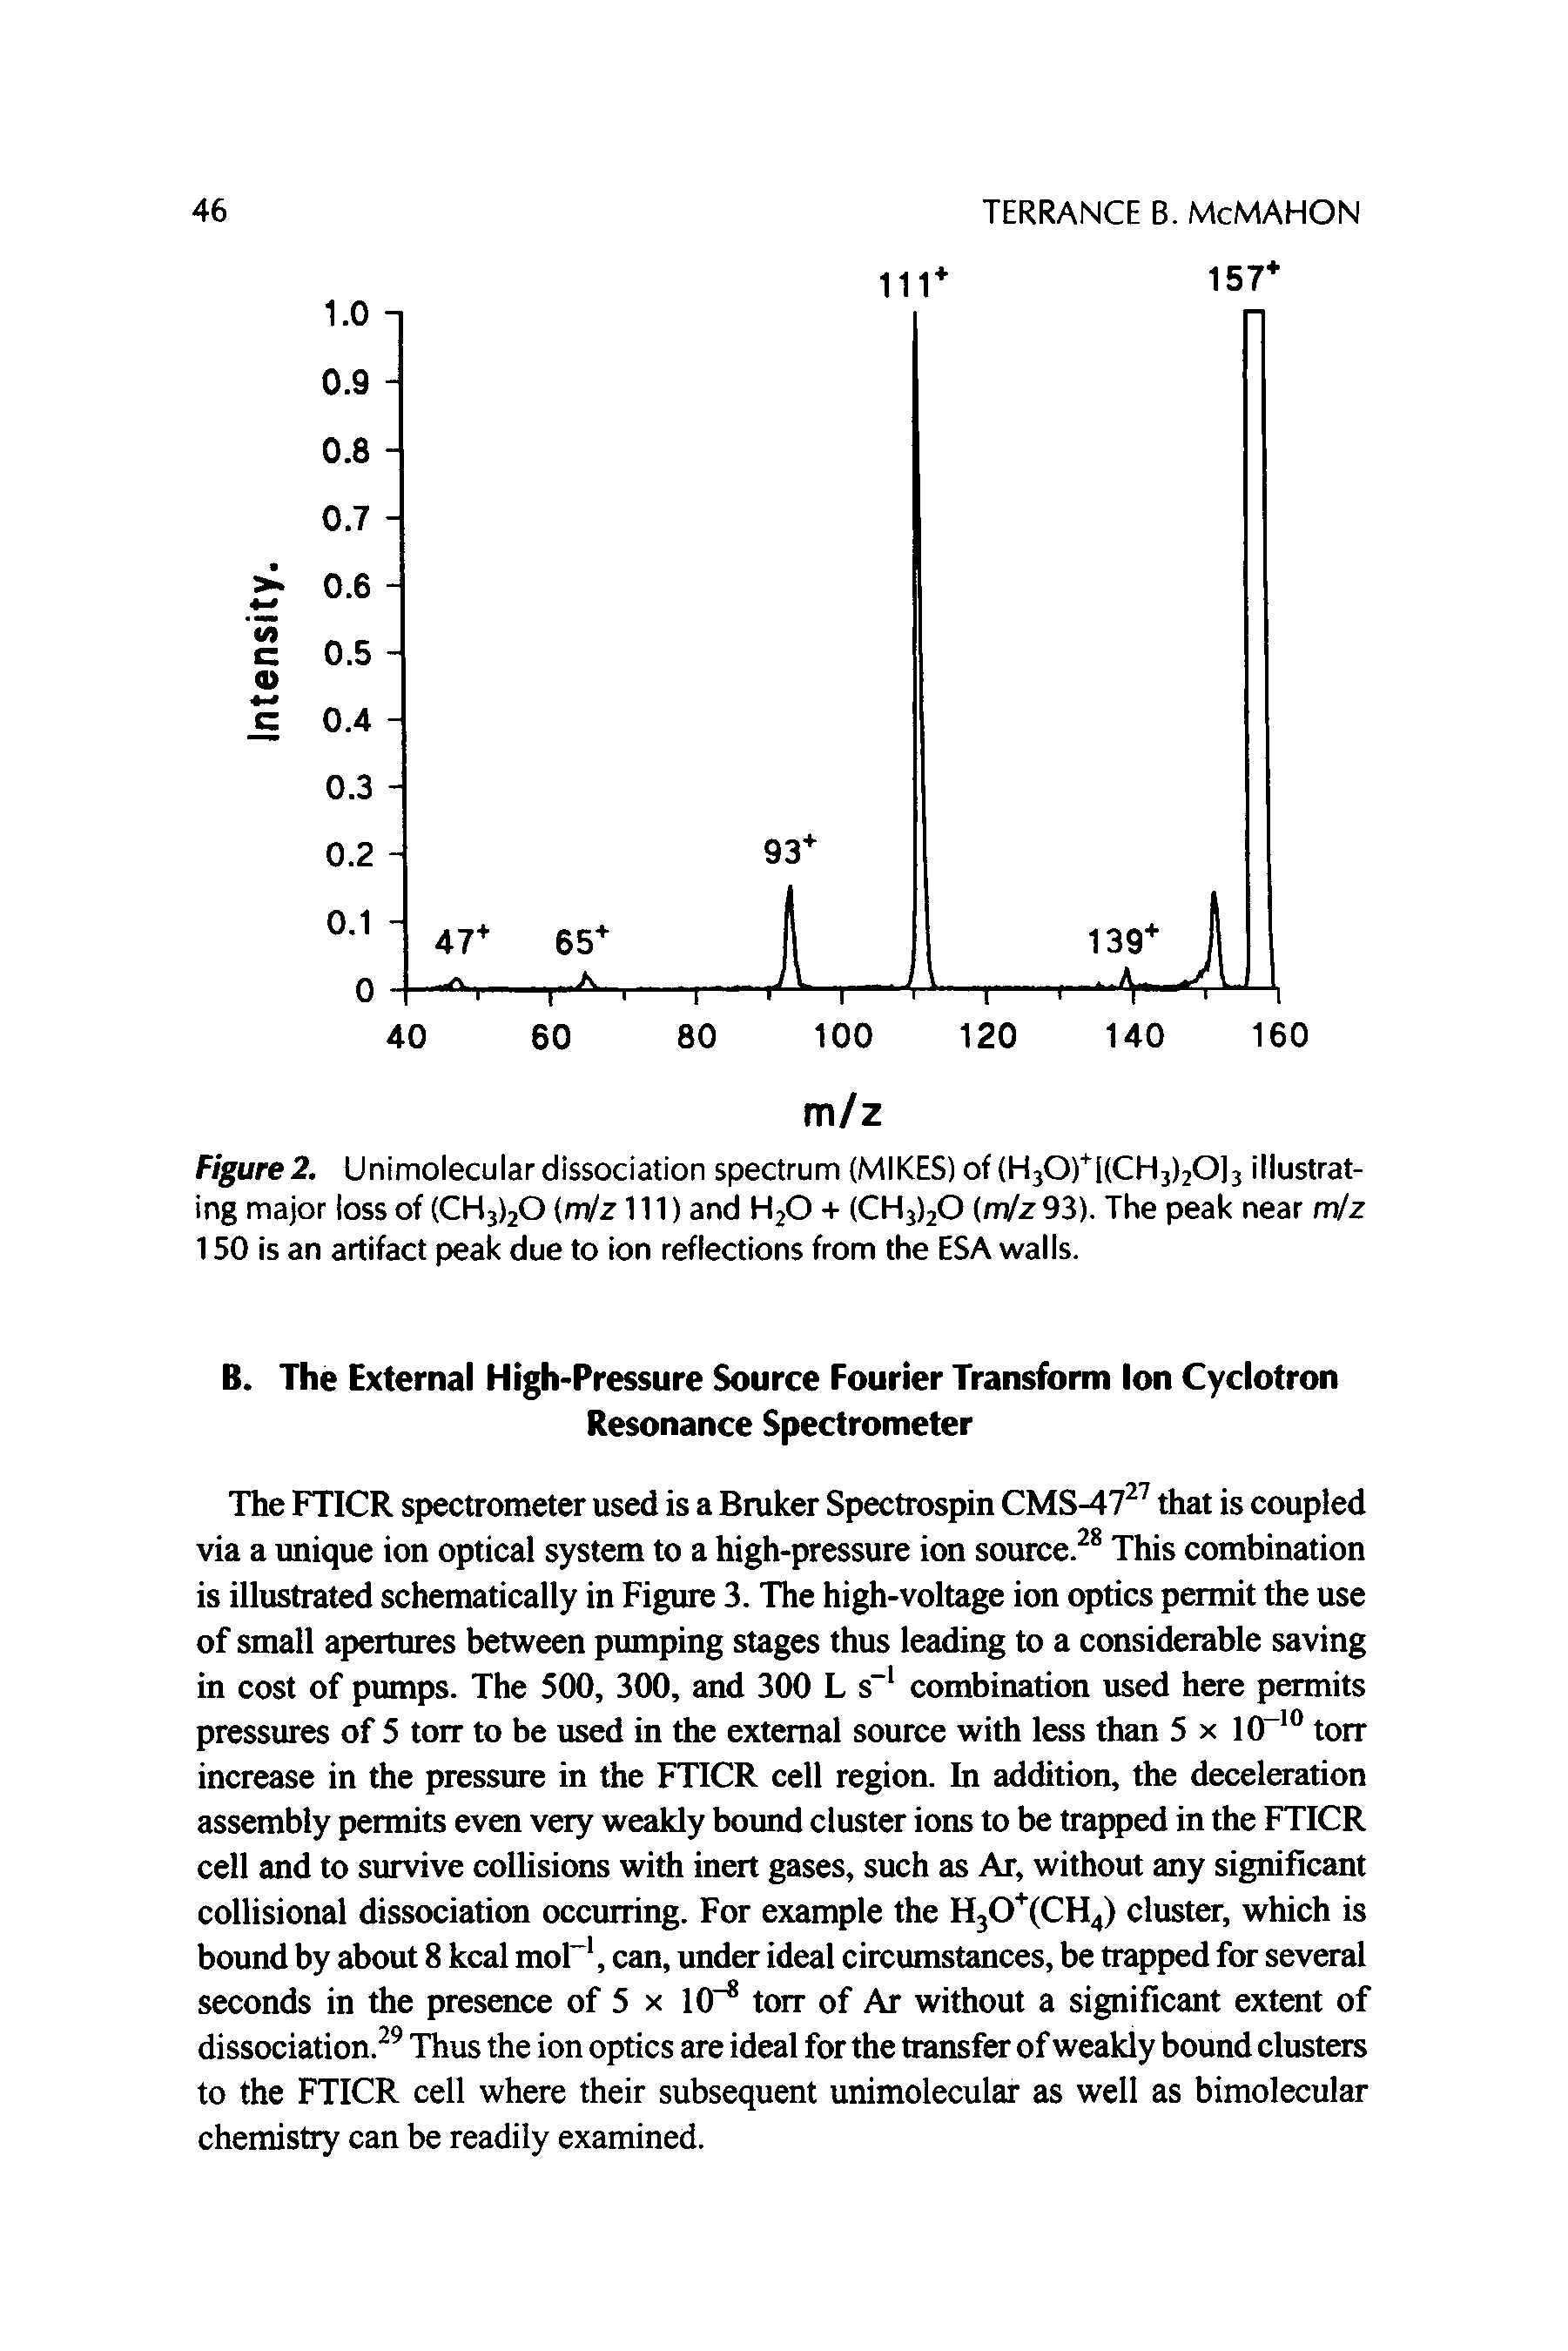 Figure2. Unimolecular dissociation spectrum (MIKES) of H30) 1(CH3)20]3 illustrating major loss of (CH3>20 m/z 111) and H2O + (043)20 (m/z 93). The peak near m/z 150 is an artifact peak due to ion reflections from the ESA walls.